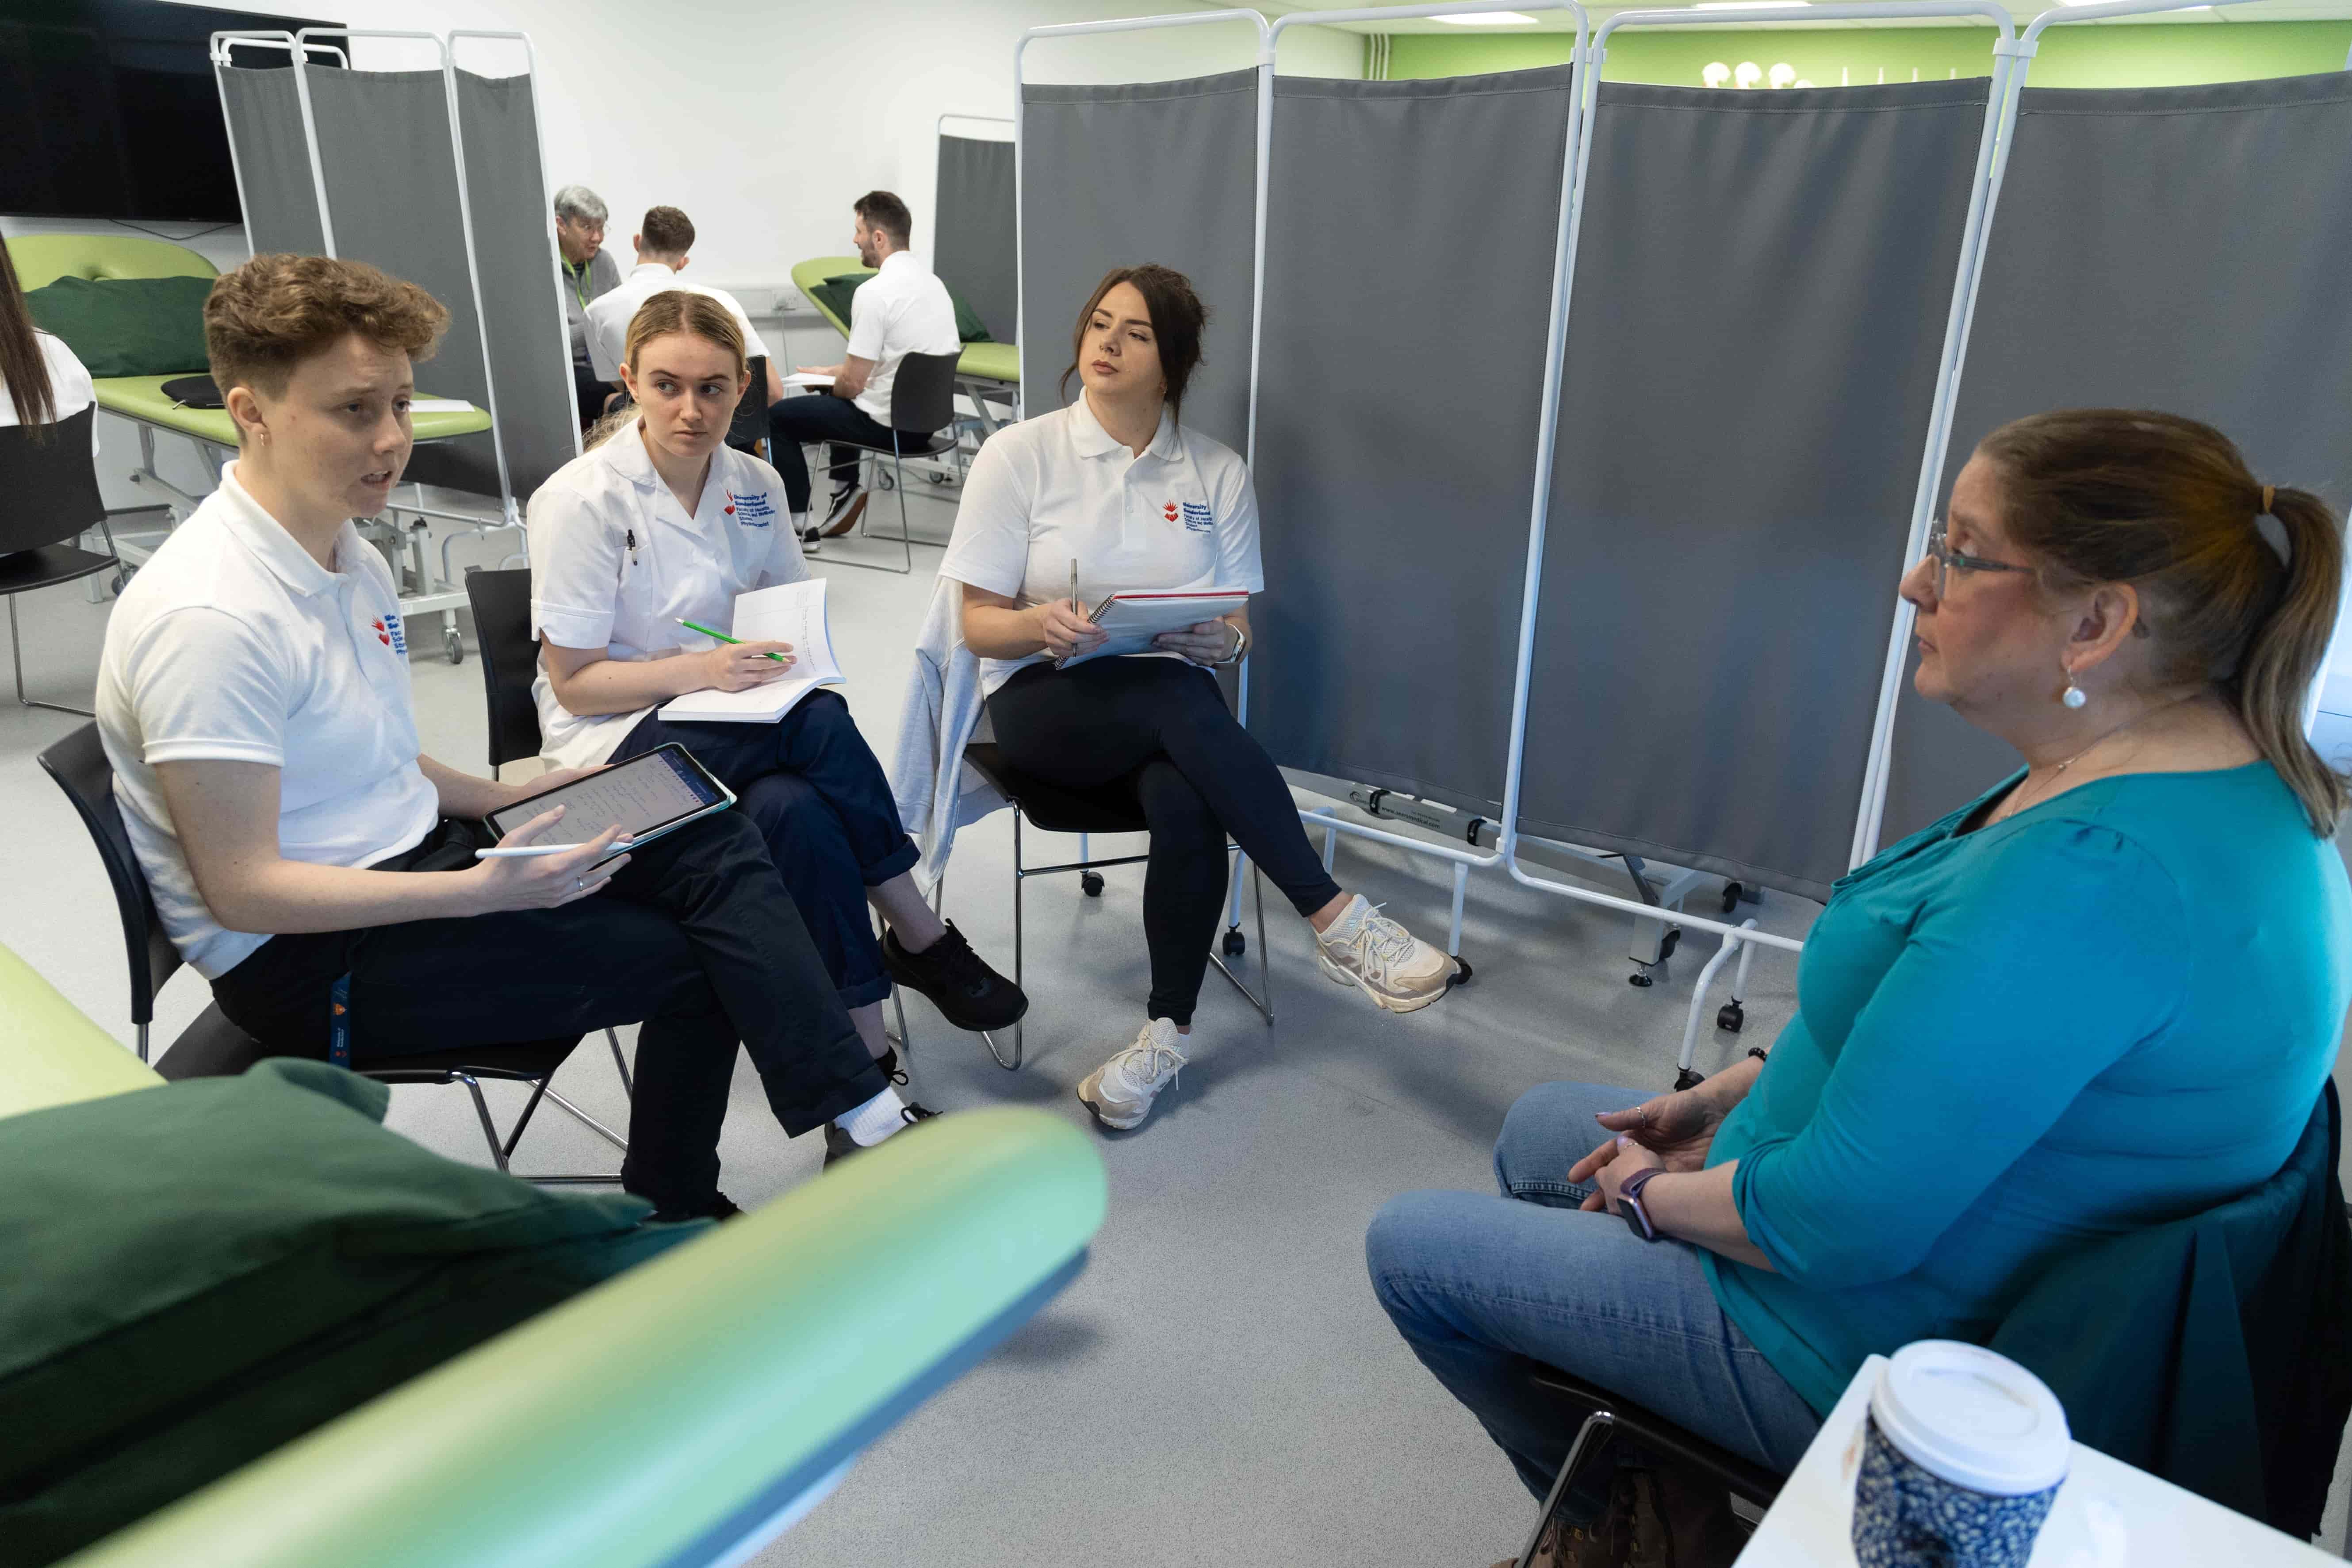 Three physiotherapy students speaking with a PCPI member during a session